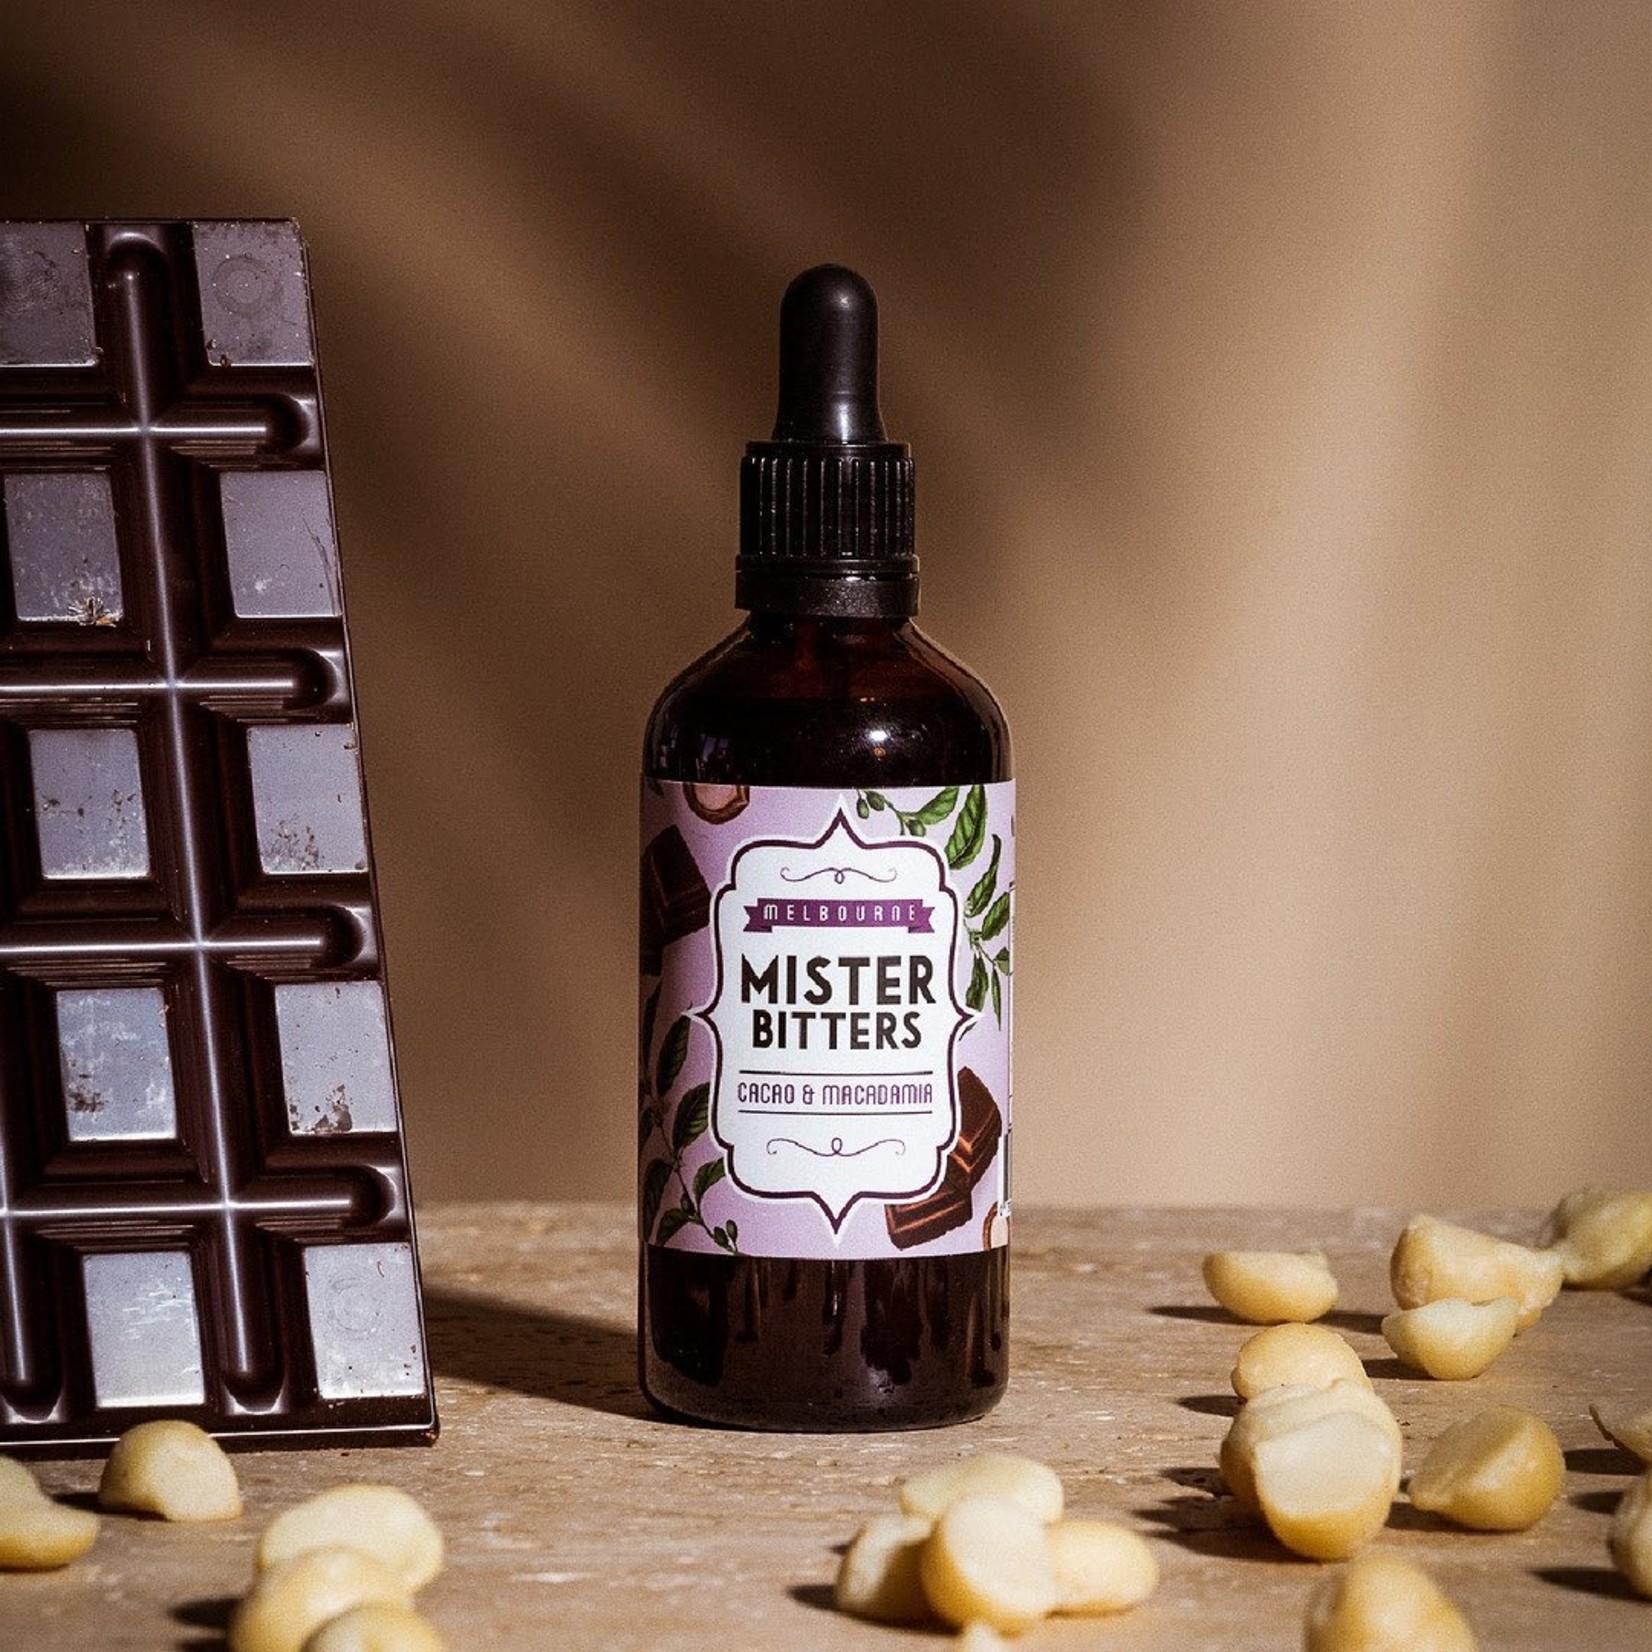 Mister Bitters Mister Bitters Cacao & Macadamia